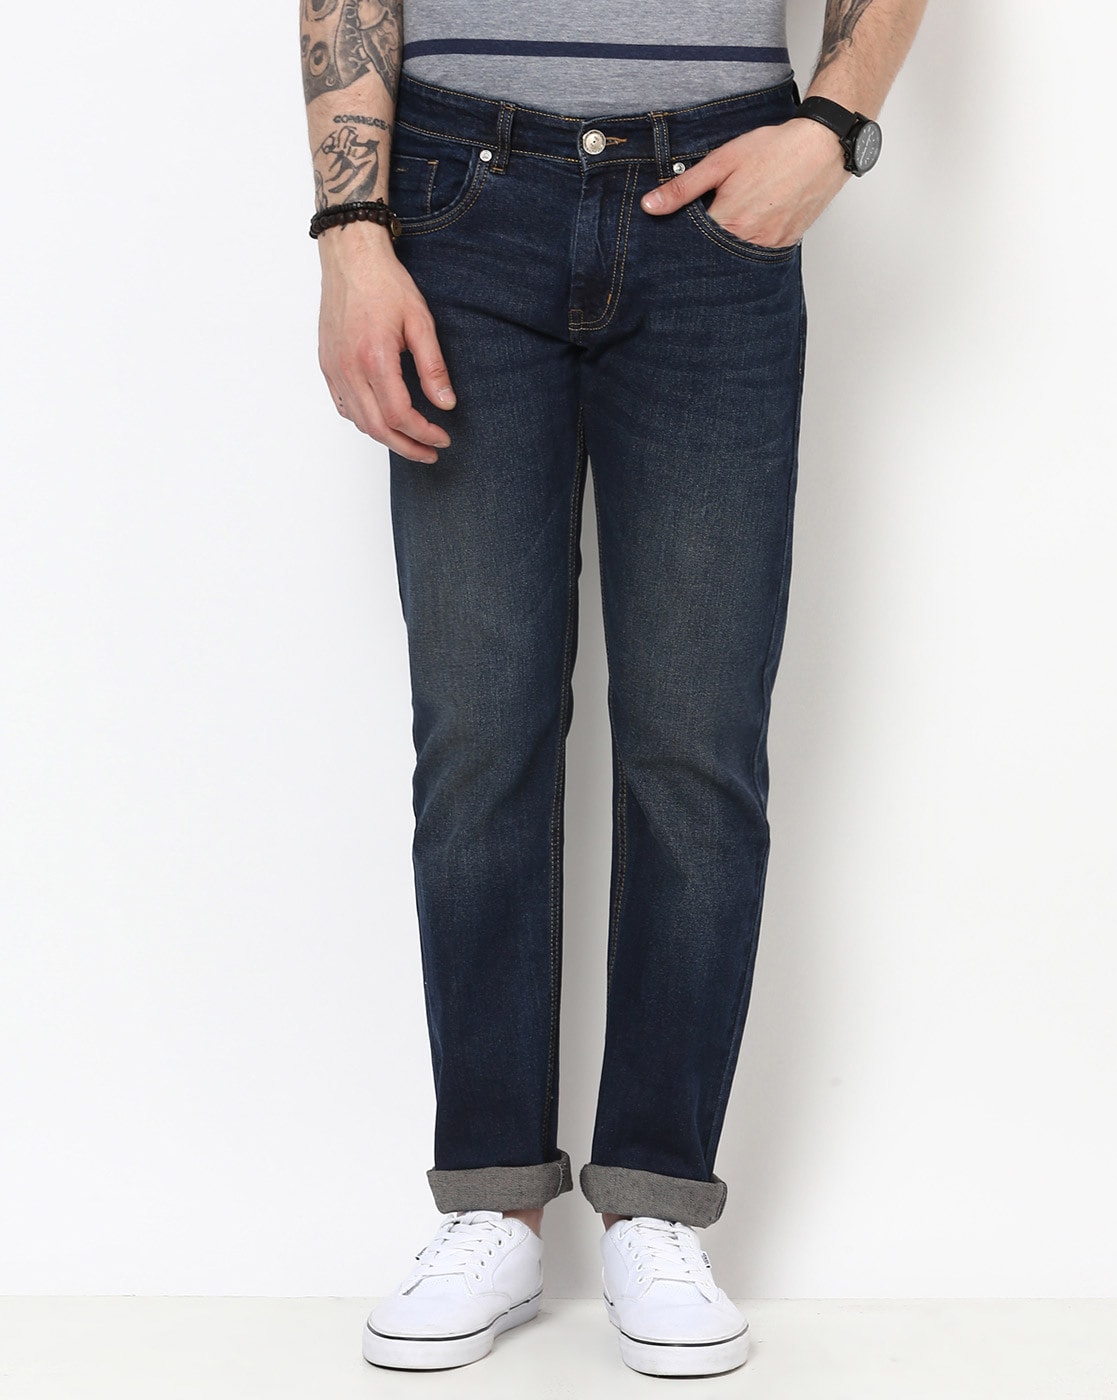 monte carlo jeans online shopping